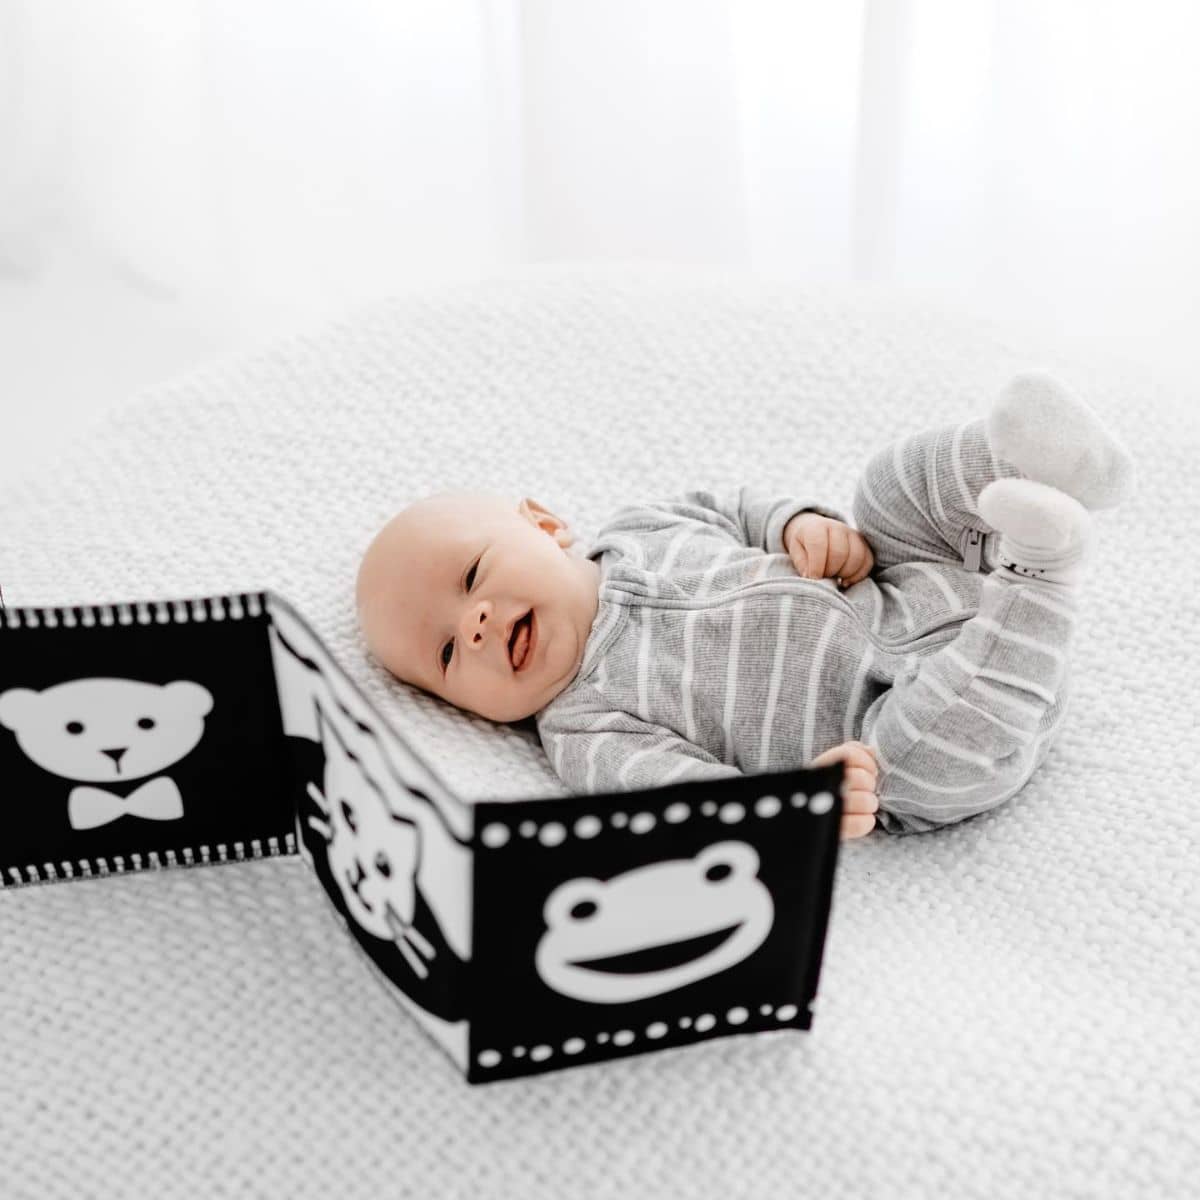 Mesmerised Faces for Baby Organic Cloth Book